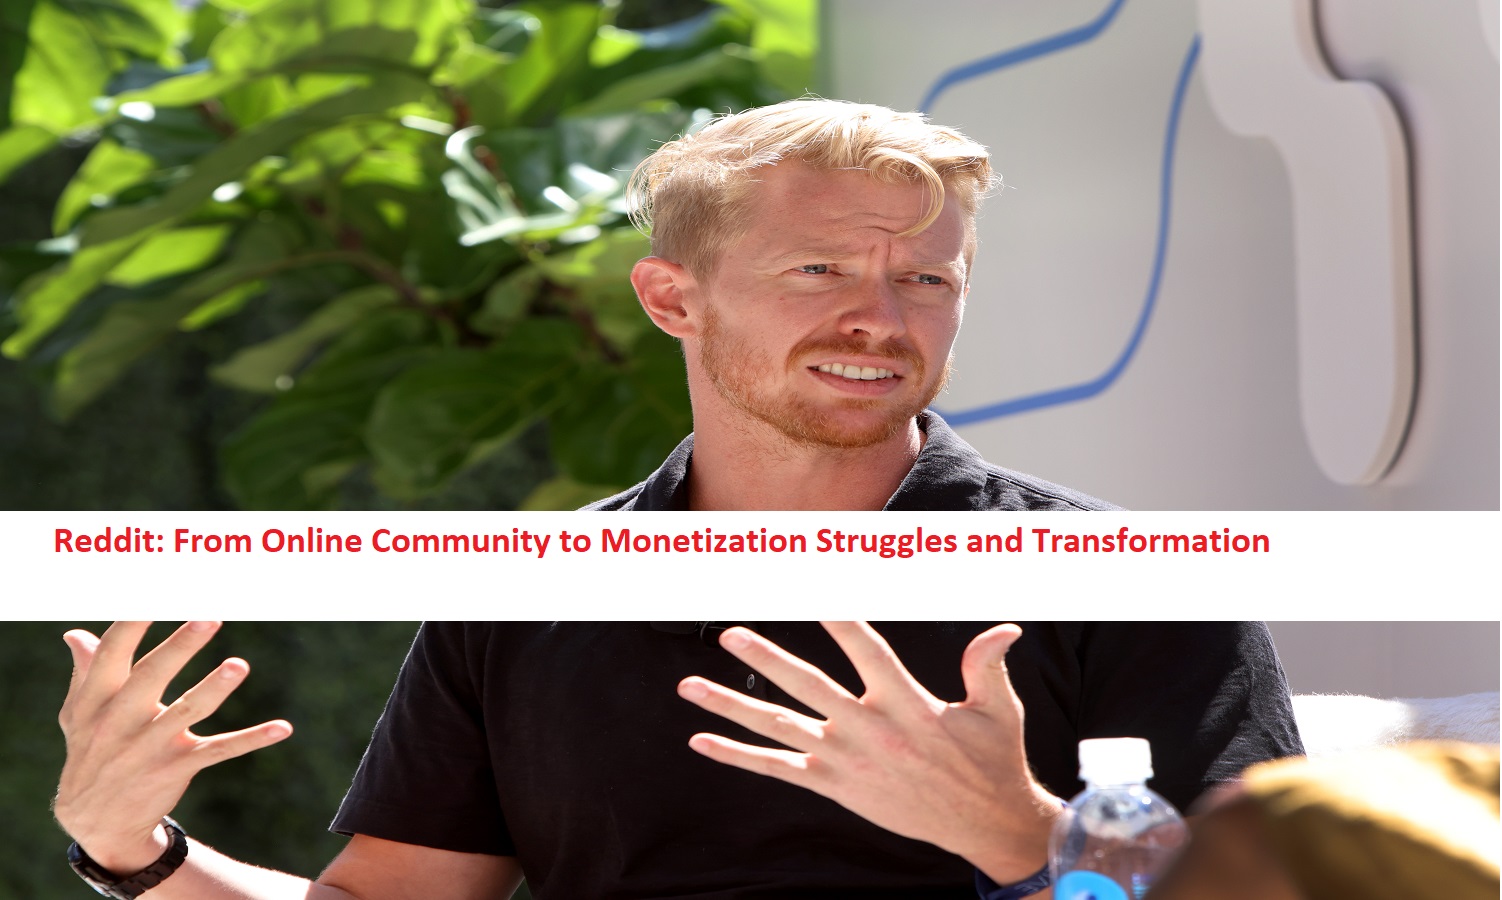 Reddit: From Online Community to Monetization Struggles and Transformation